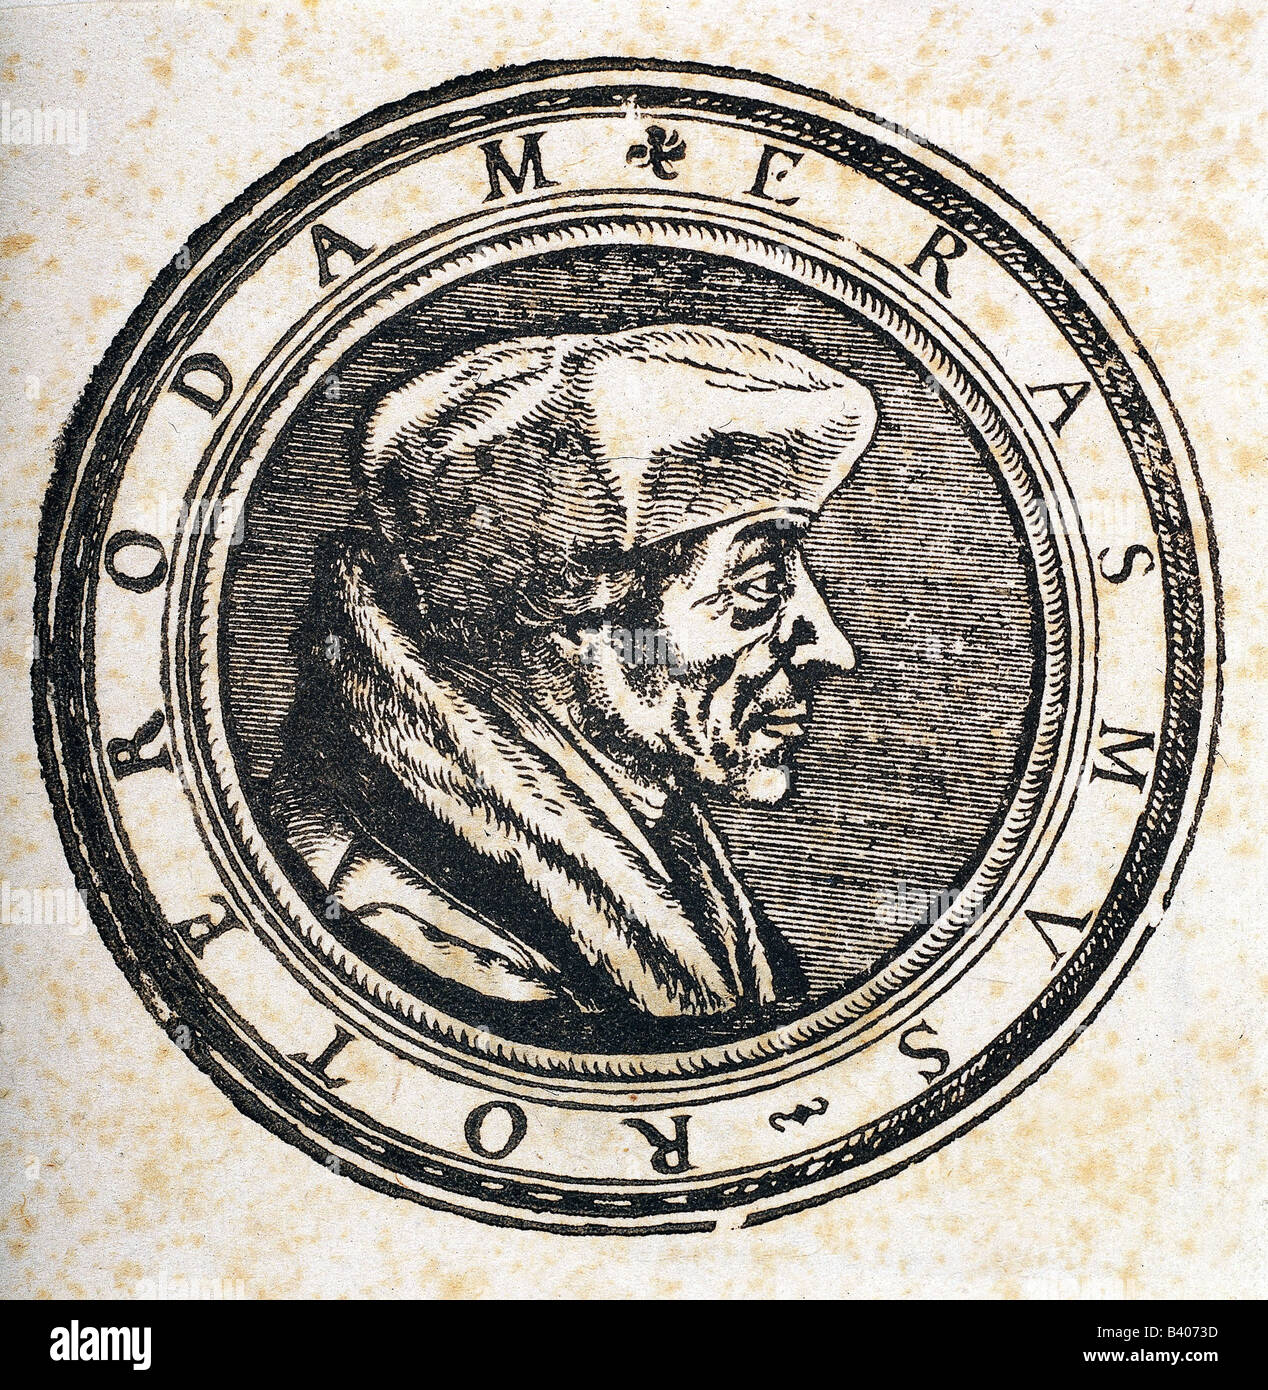 Desiderius Erasmus Roterodamus, (Desiderius Erasmus of Rotterdam), 27.10.1469 - 12.7.1536, Dutch humanist and theologian, portrait, copper engraving after drawing by Hans Holbein the Younger (1497 - 1543), picture of medal, circa 1520, from original by K. Kupferstichkabinett, Berlin, Germany, Artist's Copyright has not to be cleared Stock Photo